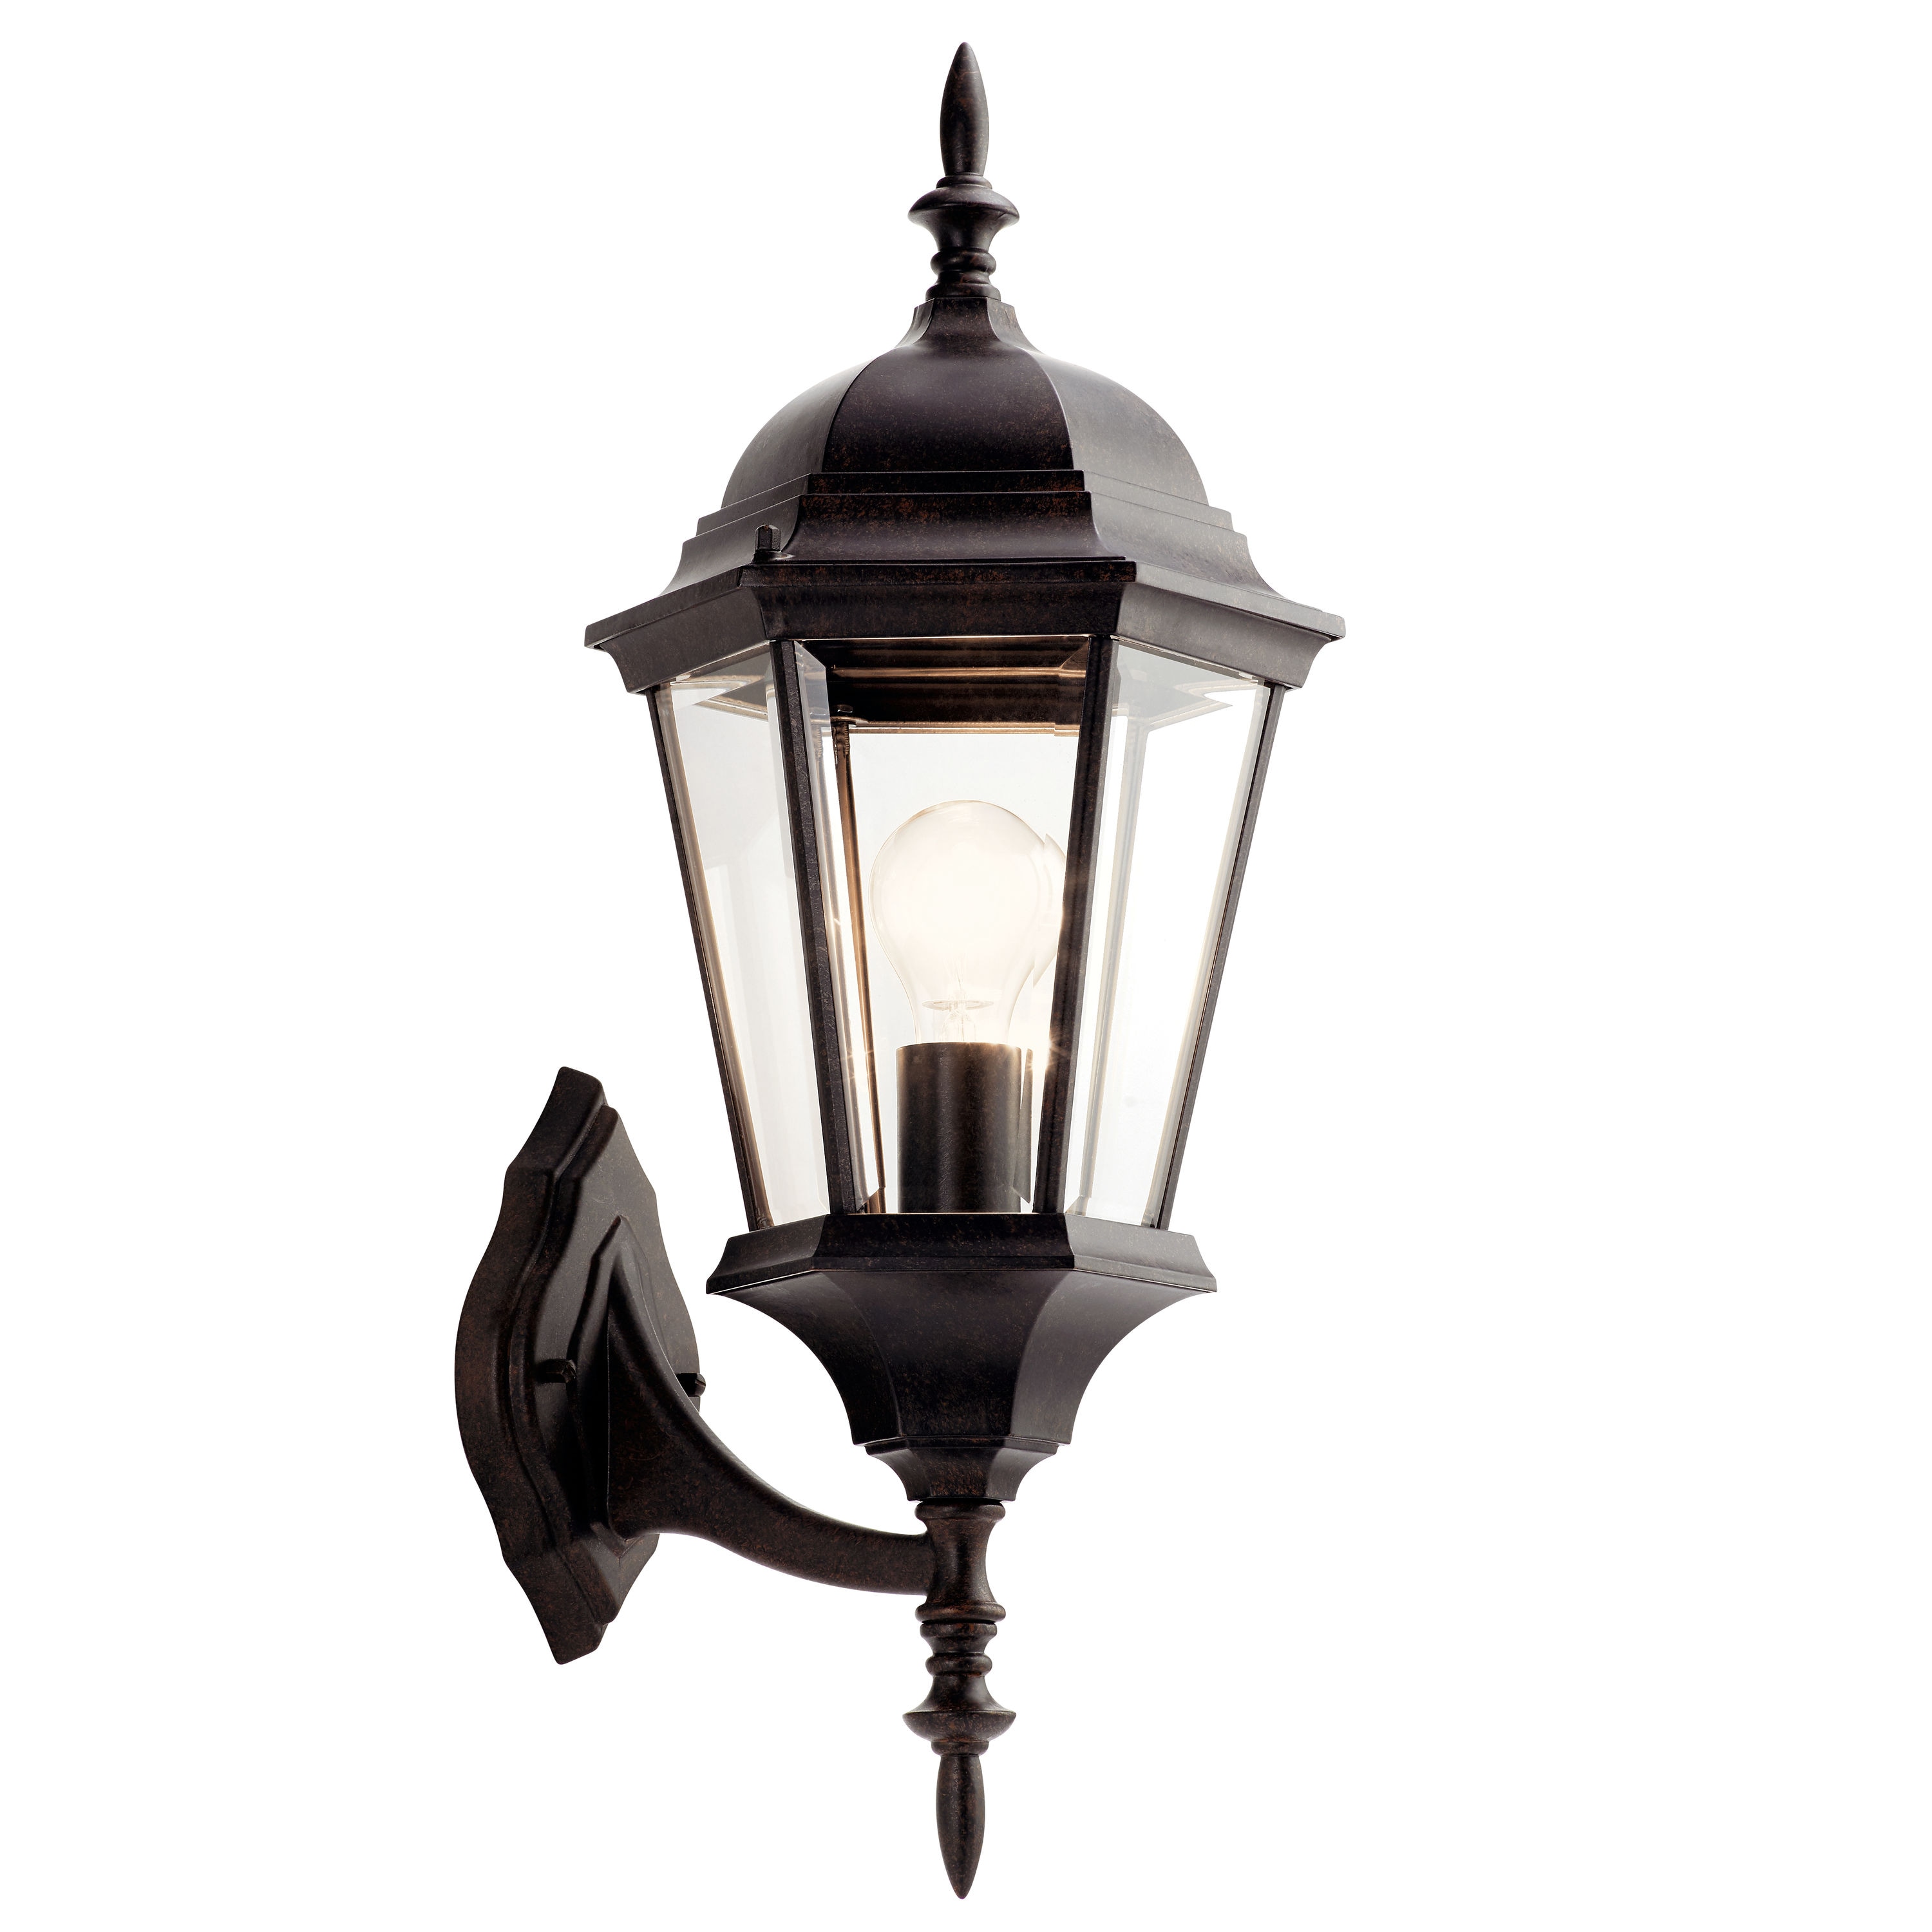 Kichler Madison 1-Light 22.75-in Tannery Bronze Outdoor Wall Light